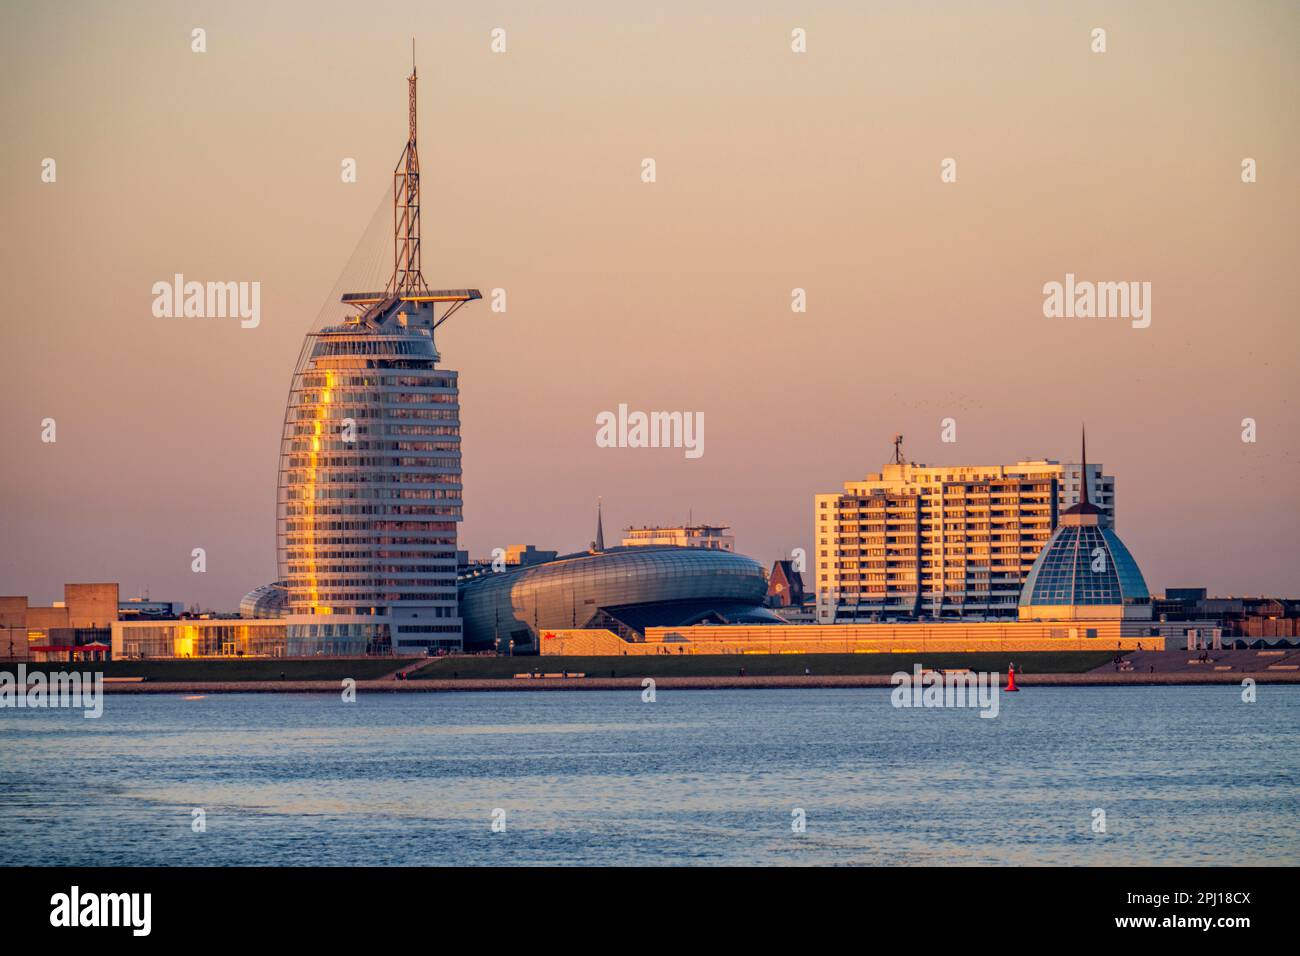 Skyline of Bremerhaven, seen over the Weser, Atlantic Sail City Hotel, Klimahaus, skyscrapers at the Columbus Center, in Bremerhaven, Bremen, Germany, Stock Photo